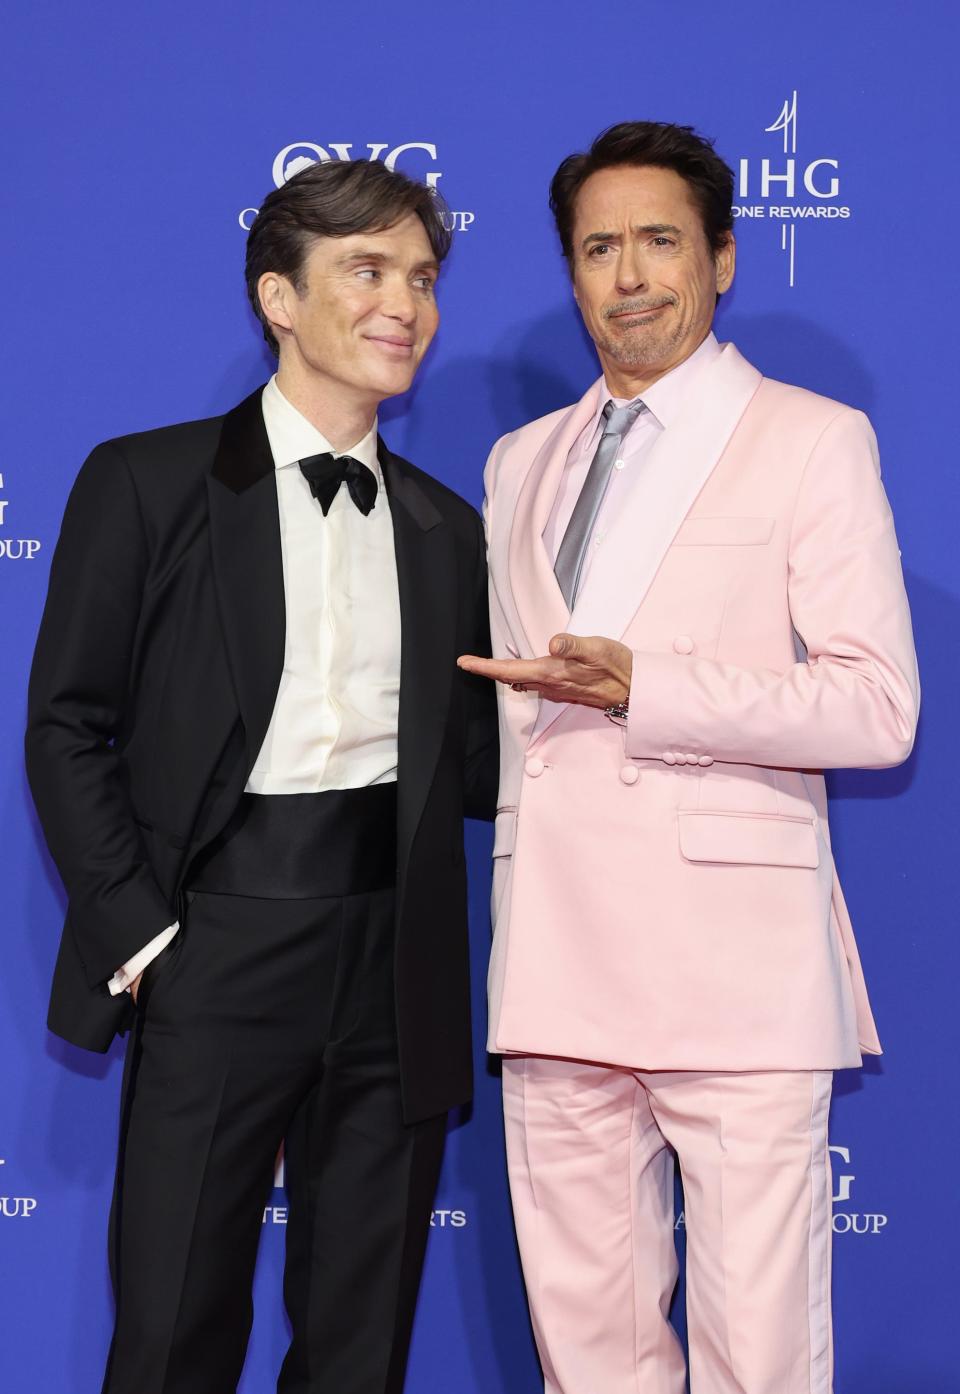 Cillian Murphy and Robert Downey Jr. attend the 35th Annual Palm Springs International Film Awards.